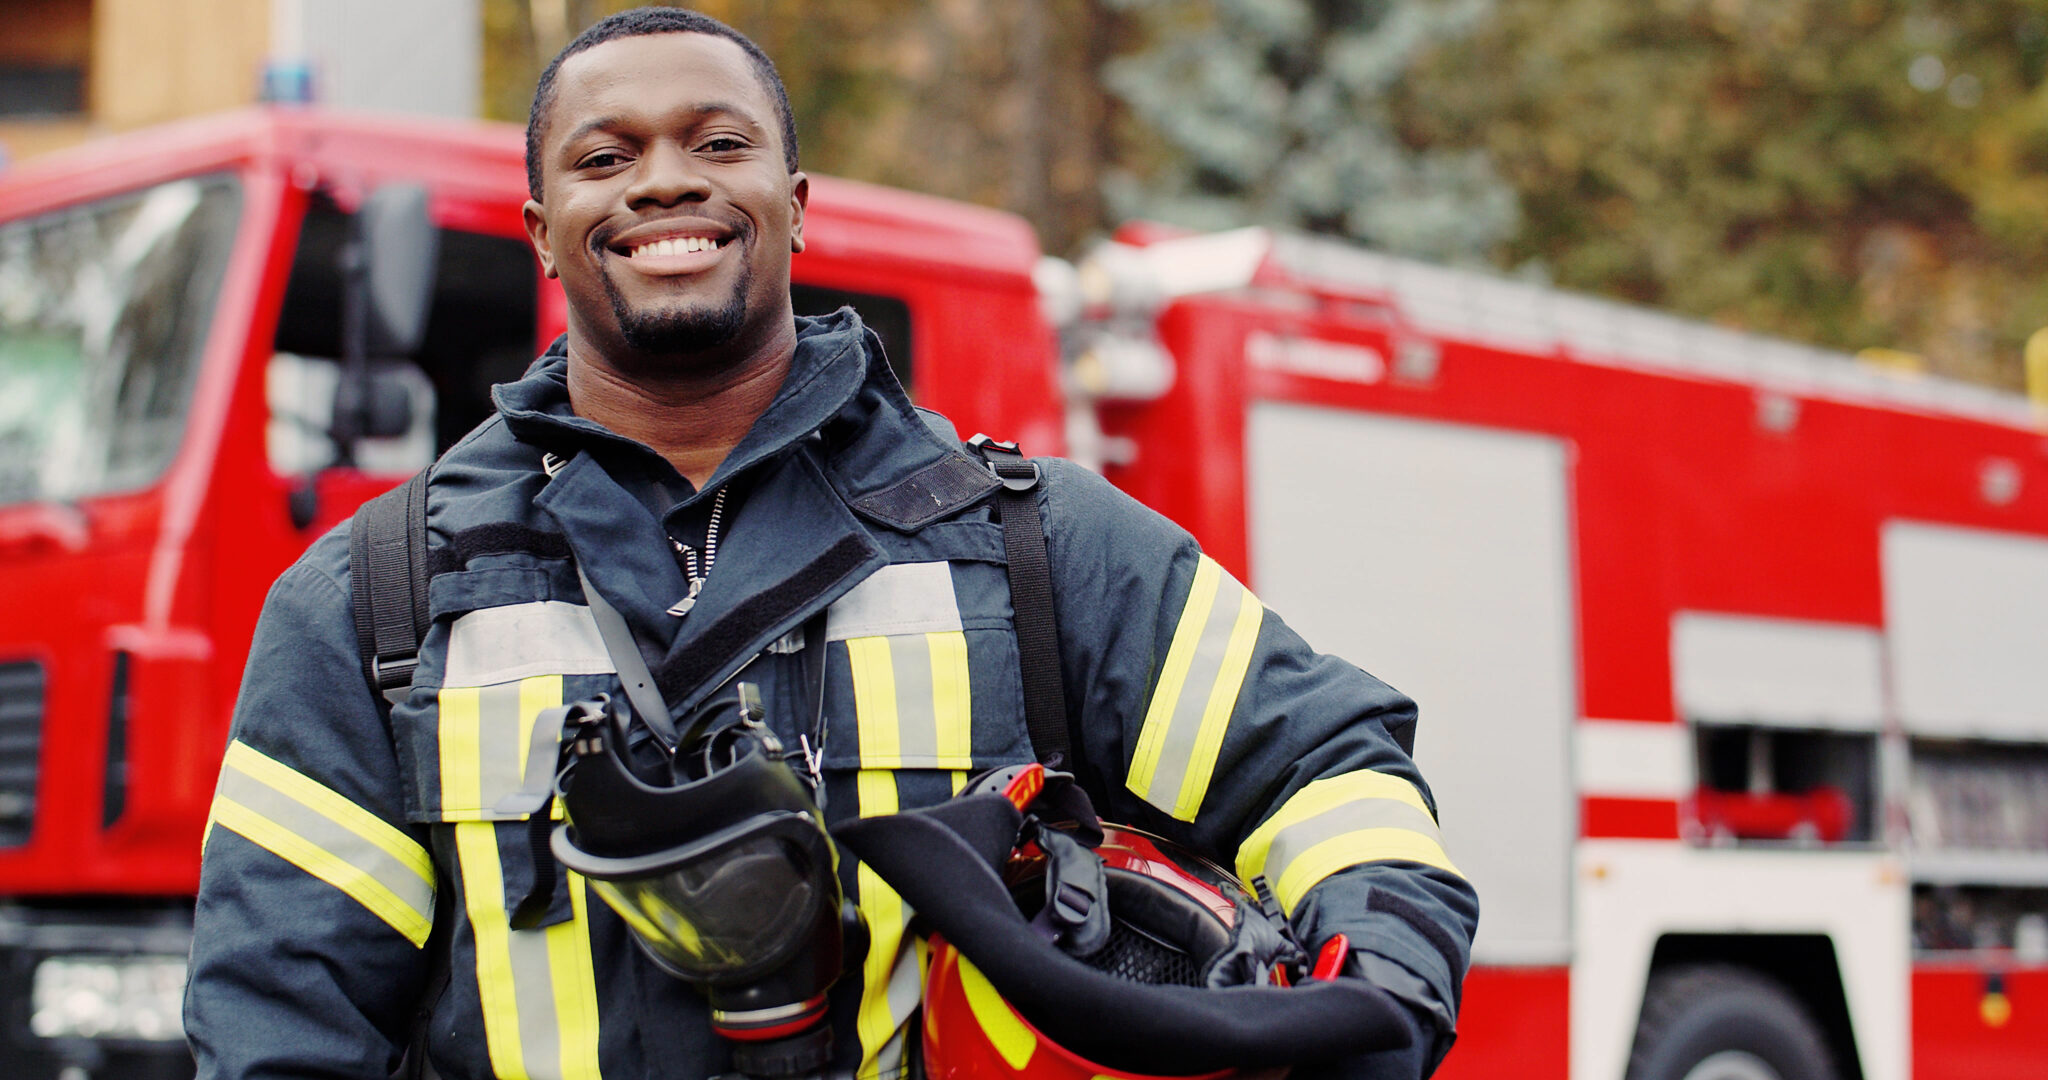 Smiling firefighter in front of engine.